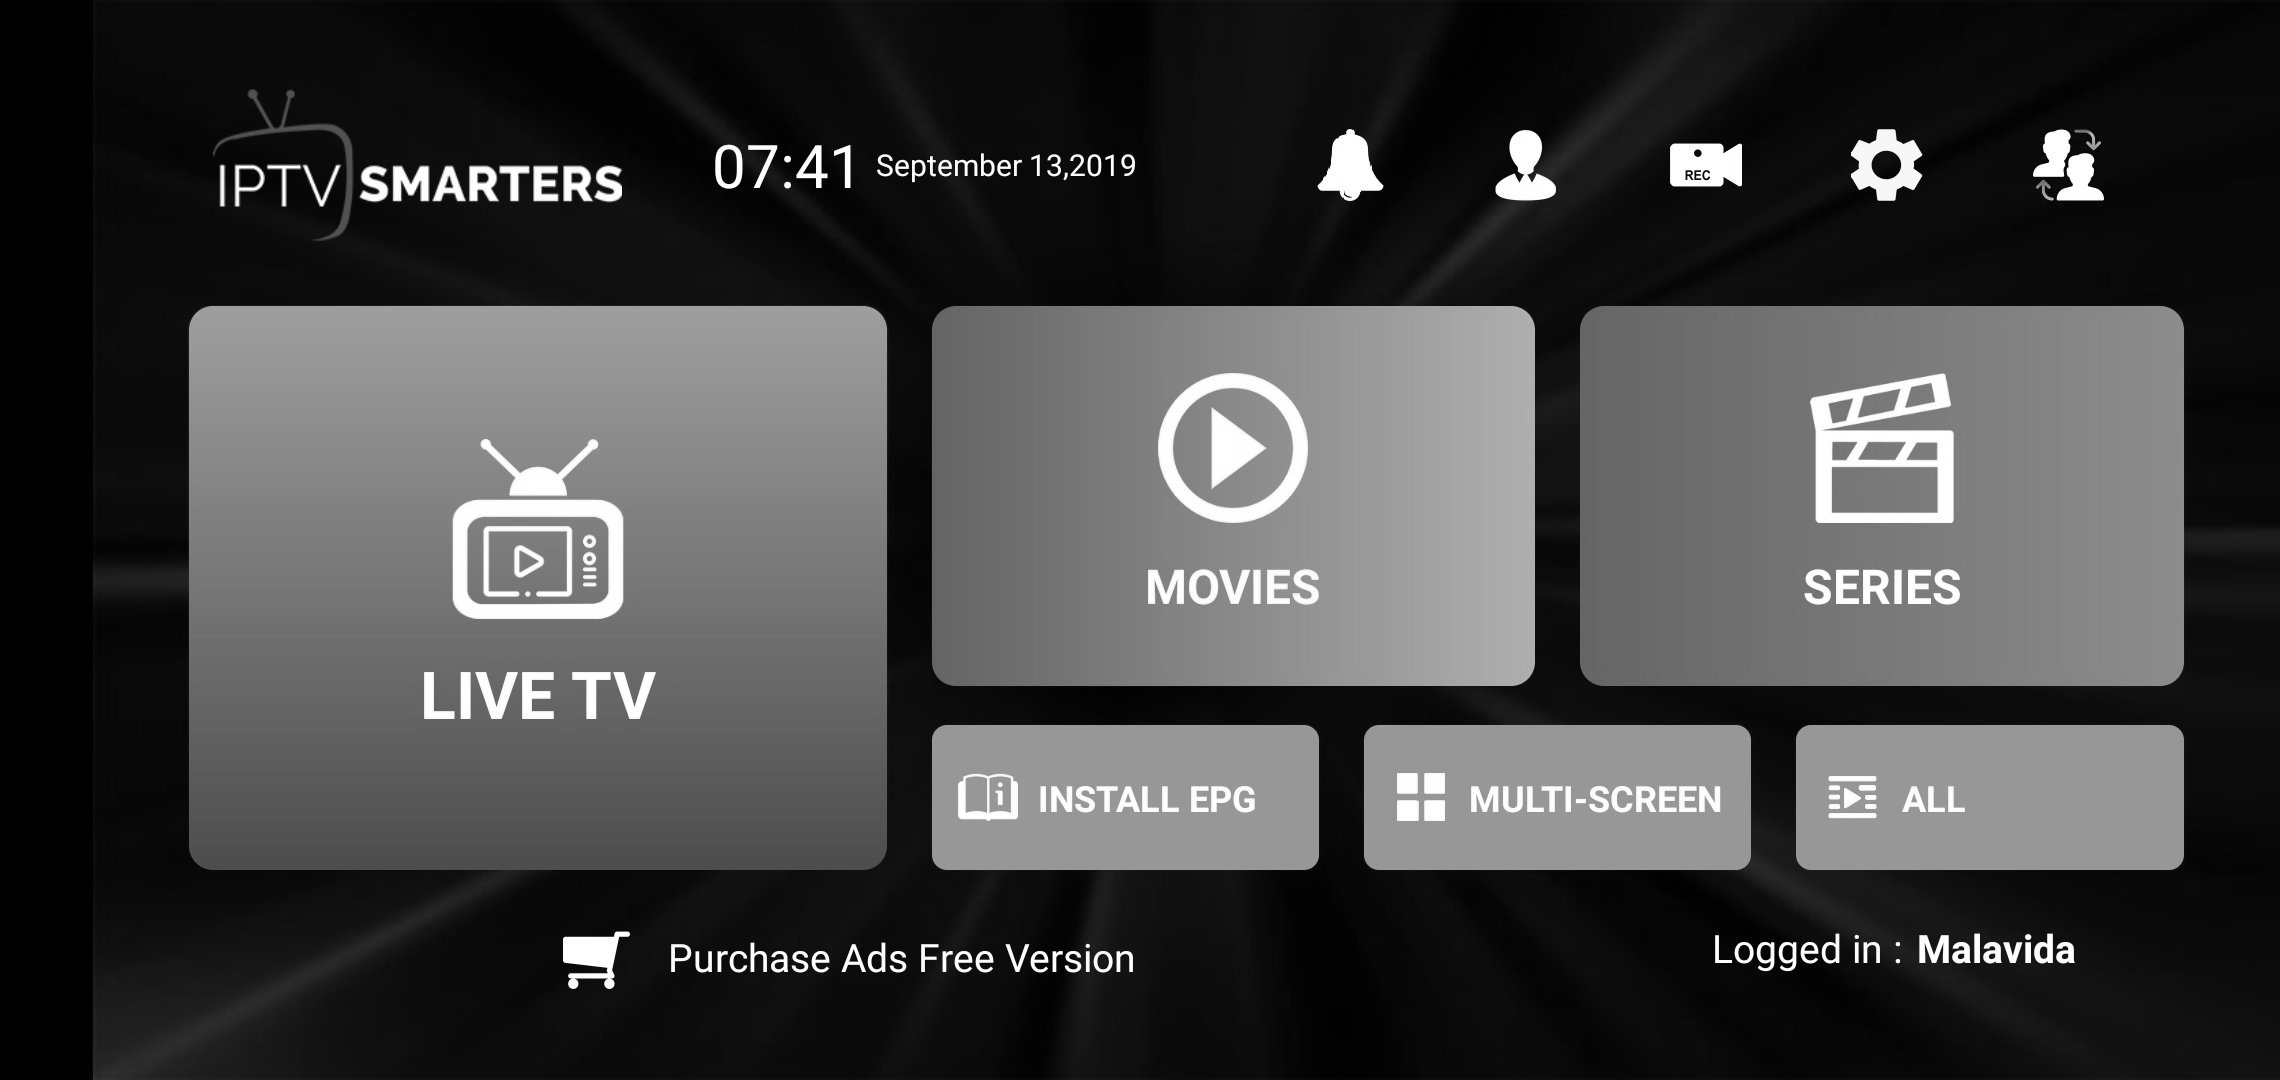 IPTV SMARTERS - Android